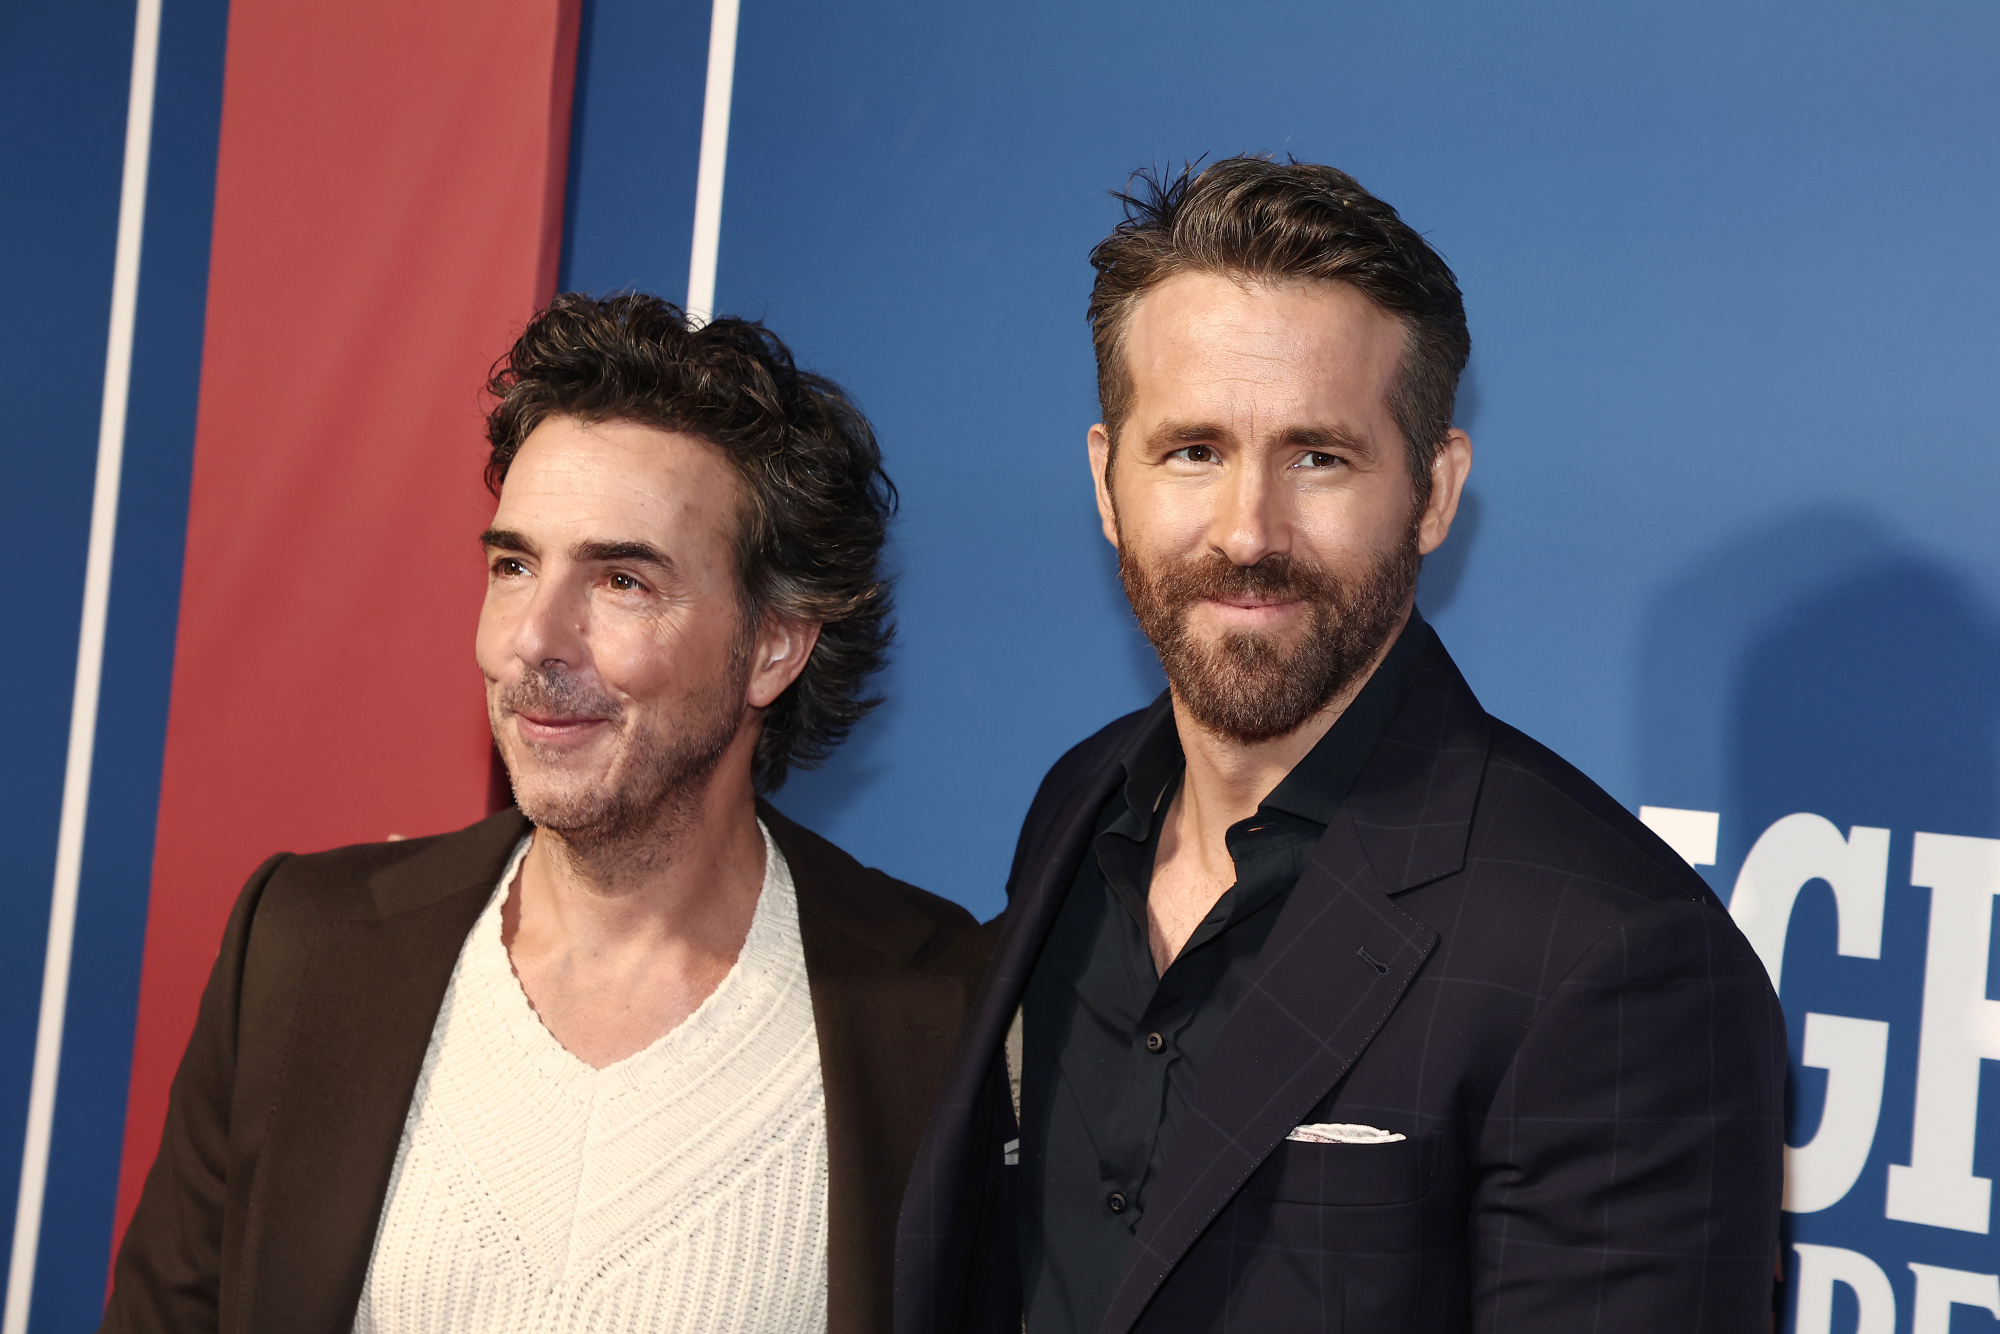 'The Adam Project' director Shawn Levy and actor Ryan Reynolds standing in front of blue step and repeat